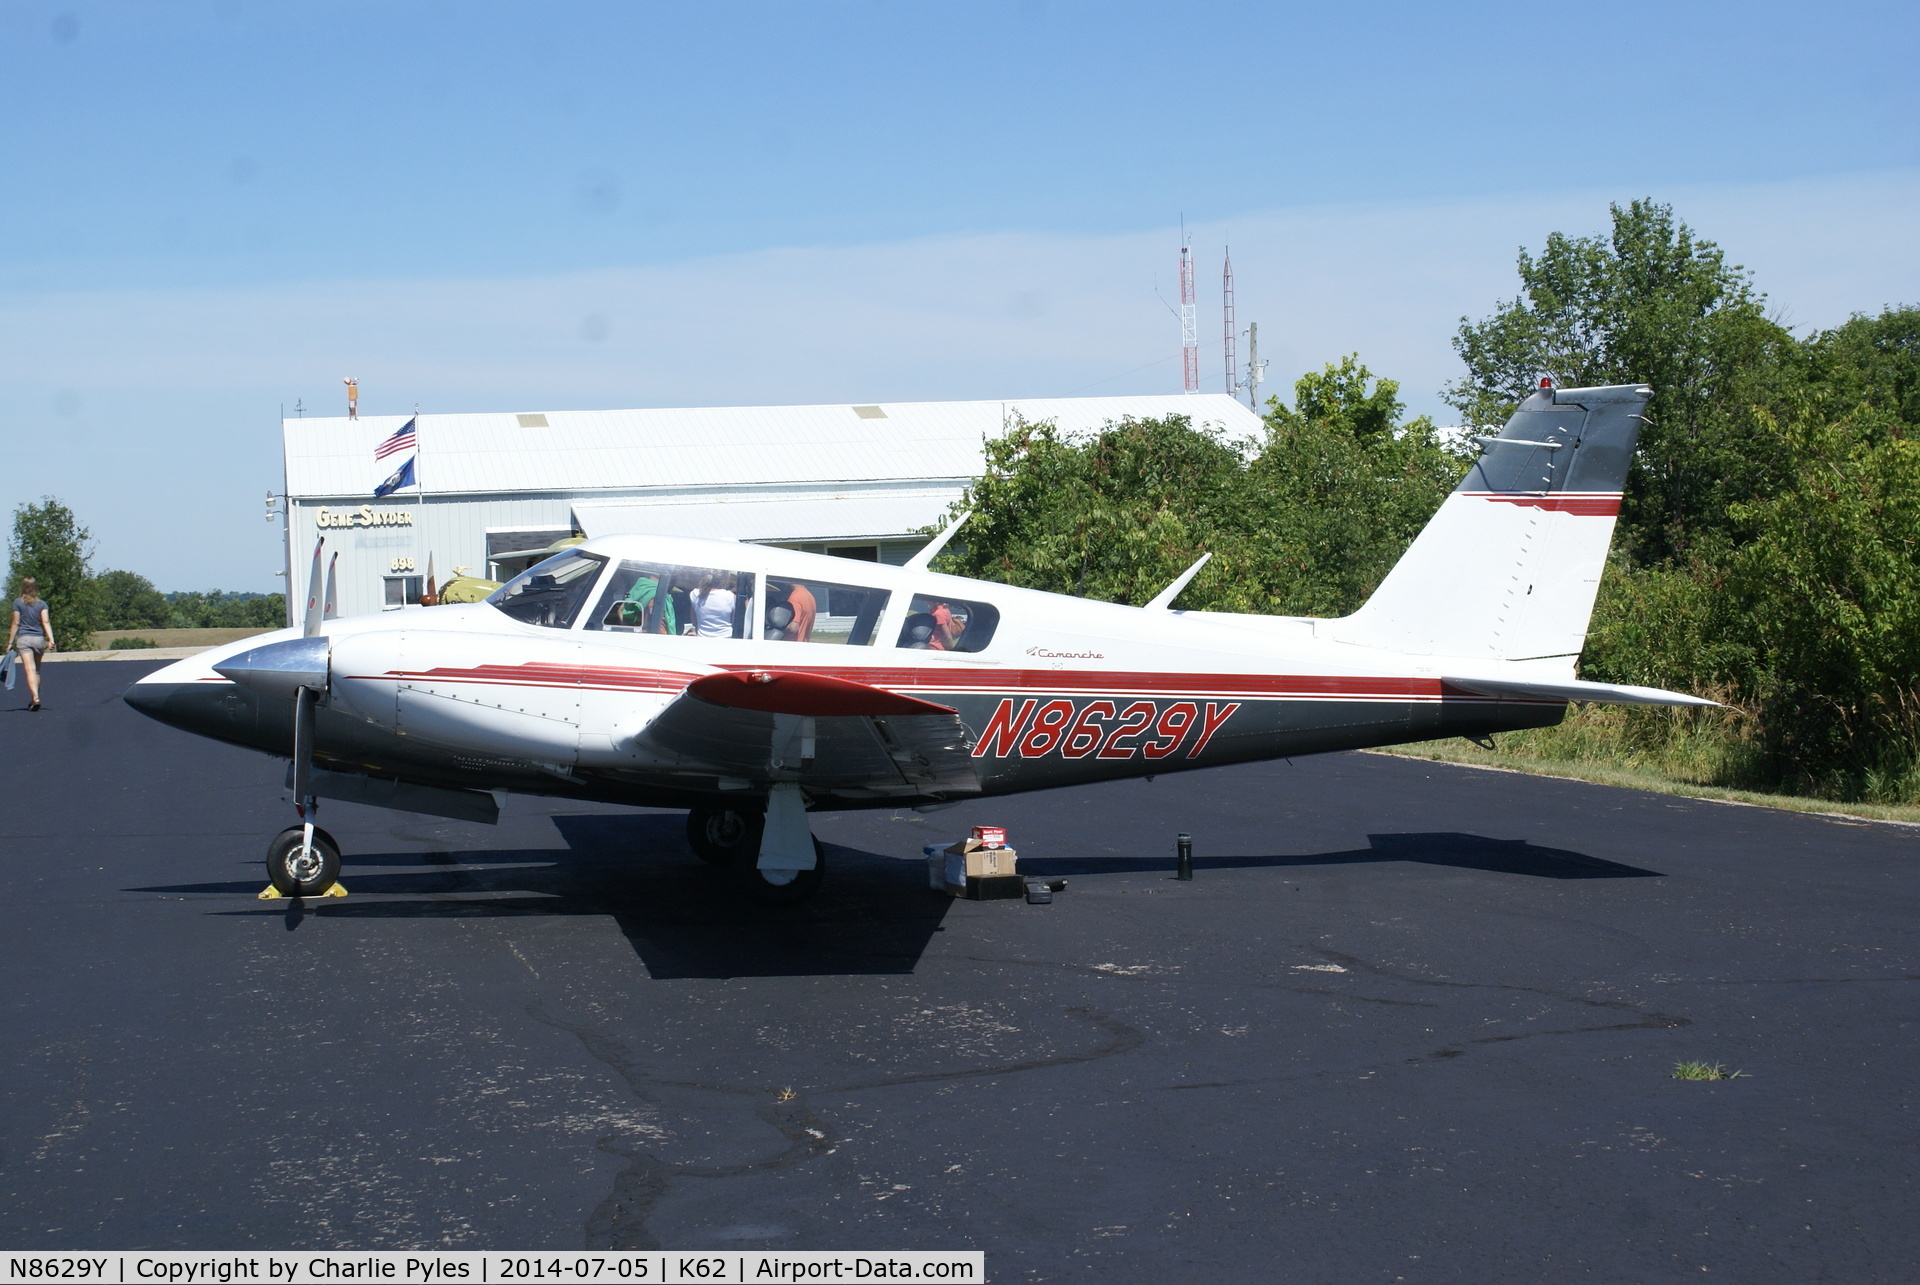 N8629Y, 1968 Piper PA-30 Twin Comanche C/N 30-1770, Support for disabled N9516J that had an emergency landing here.